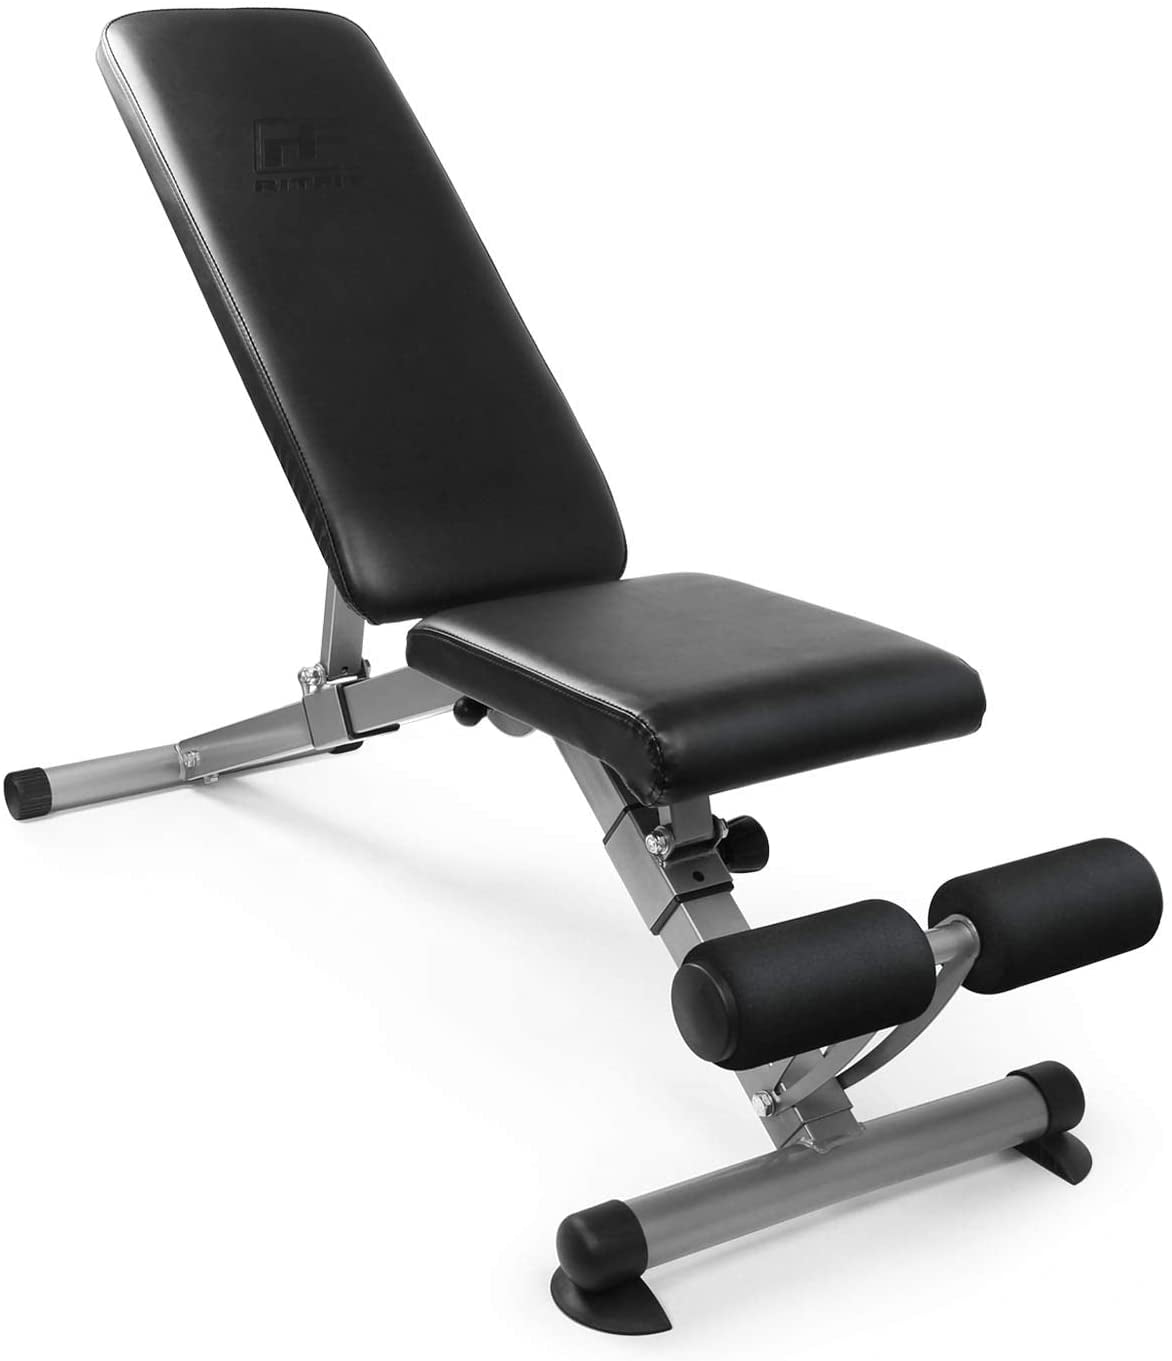 6 Day Adjustable Exercise Weight Bench For Sale for Push Pull Legs